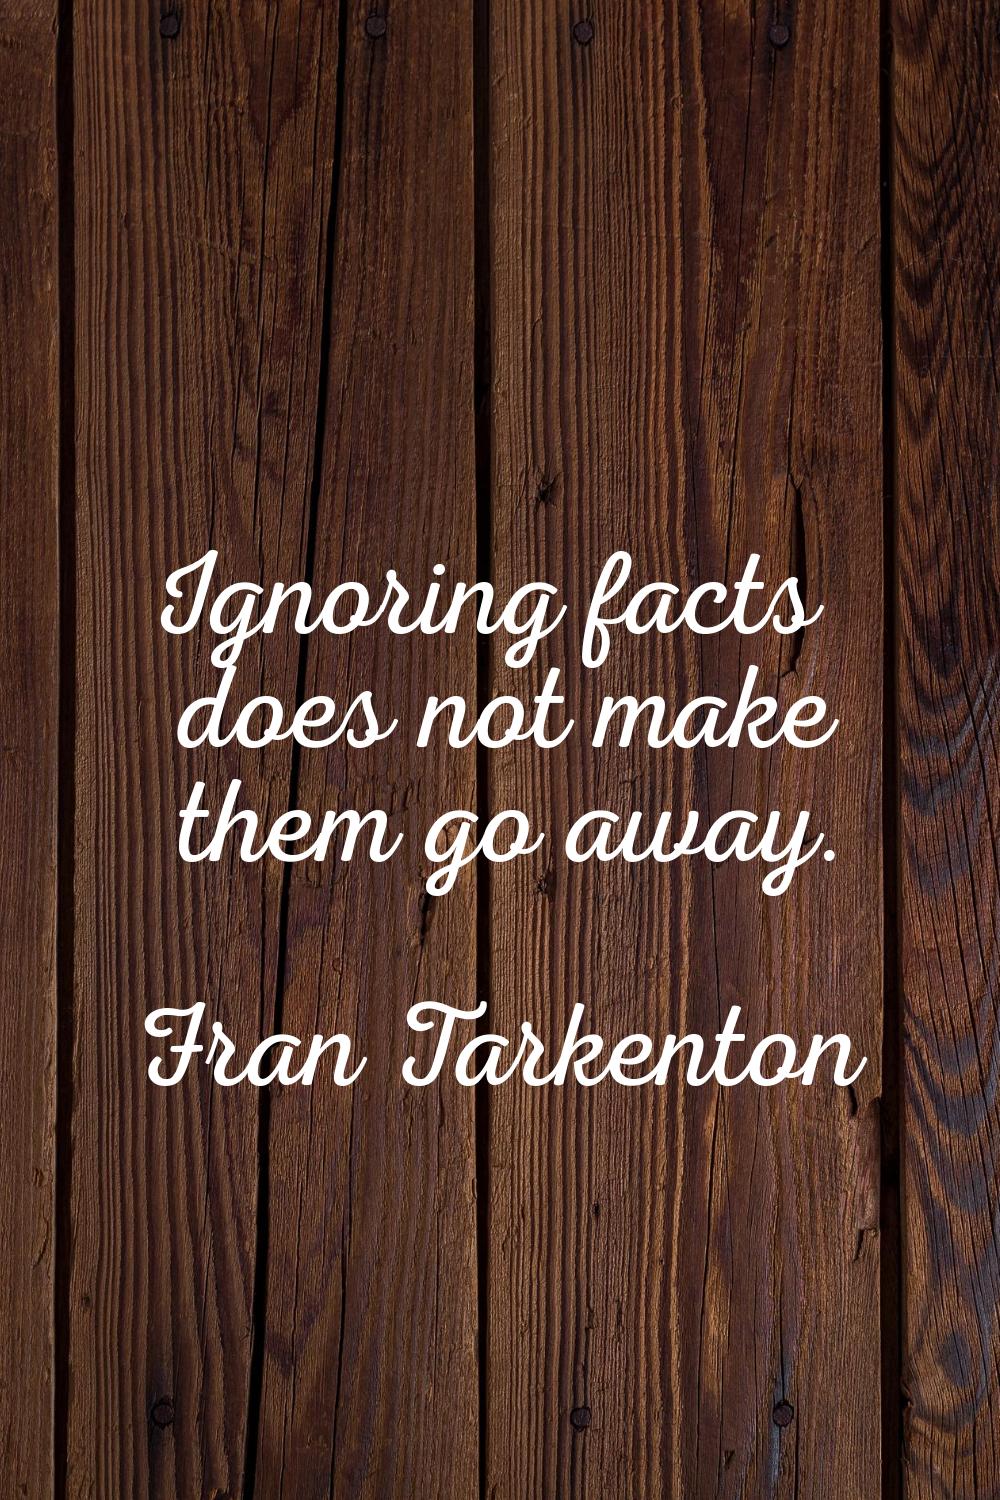 Ignoring facts does not make them go away.